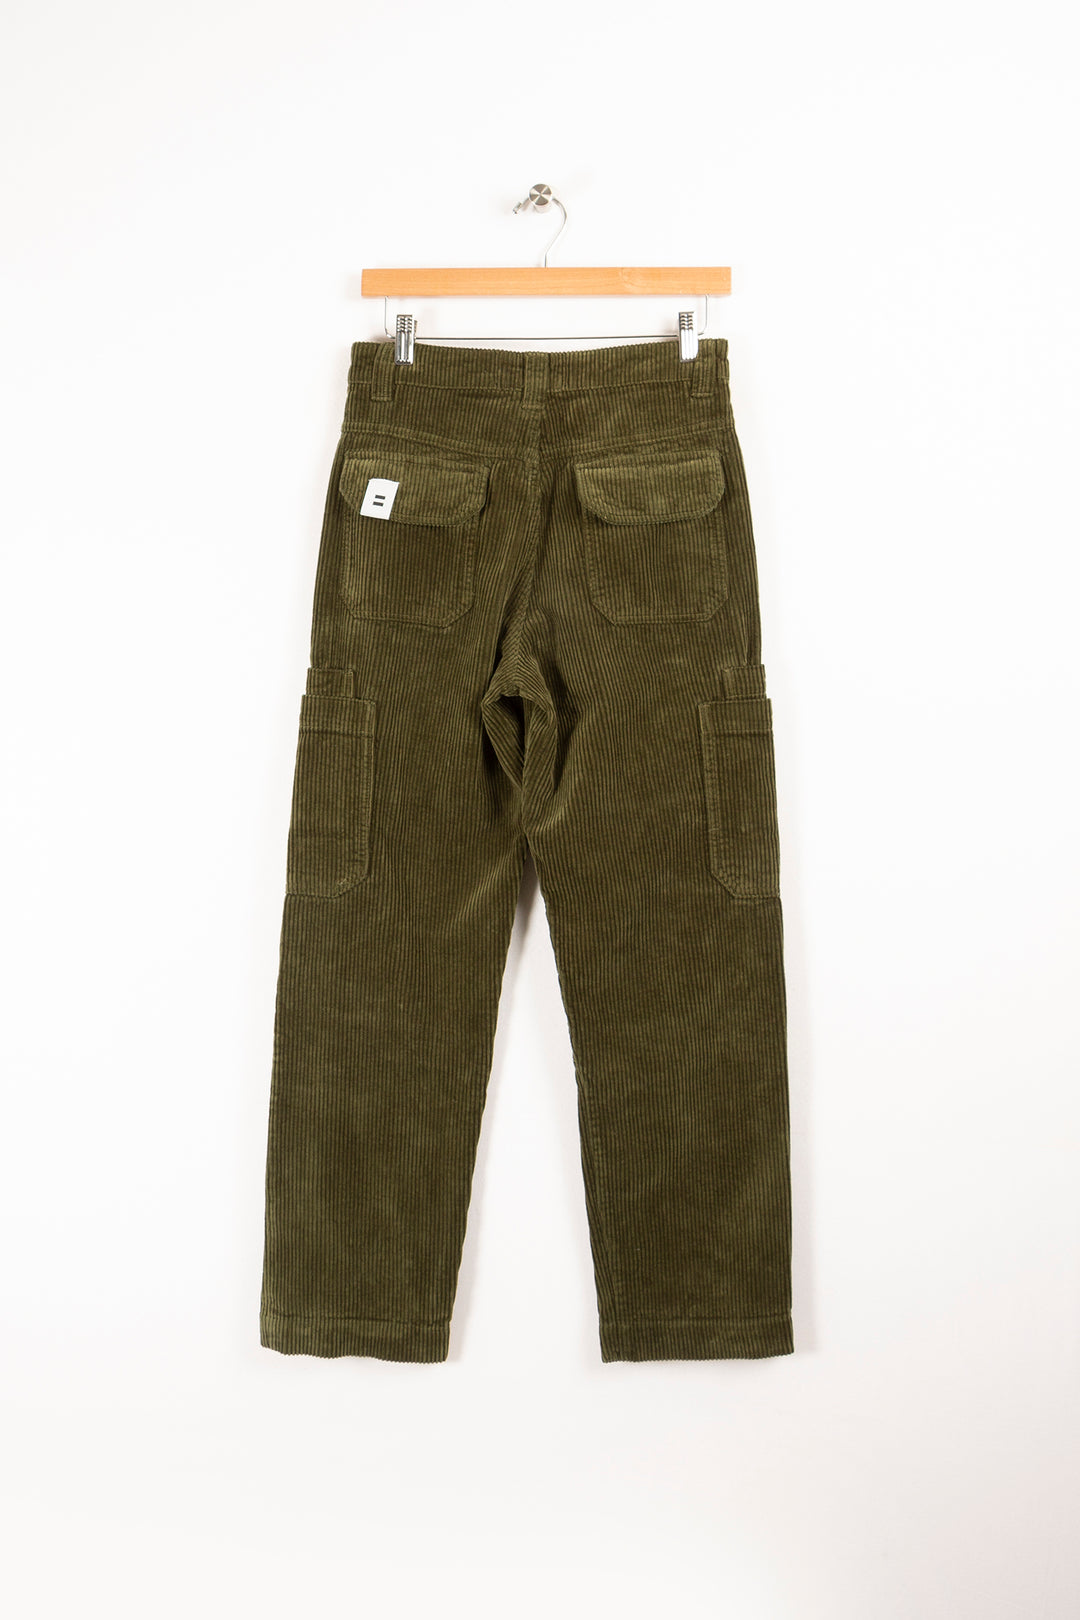 Olive green cargo pants - M/38